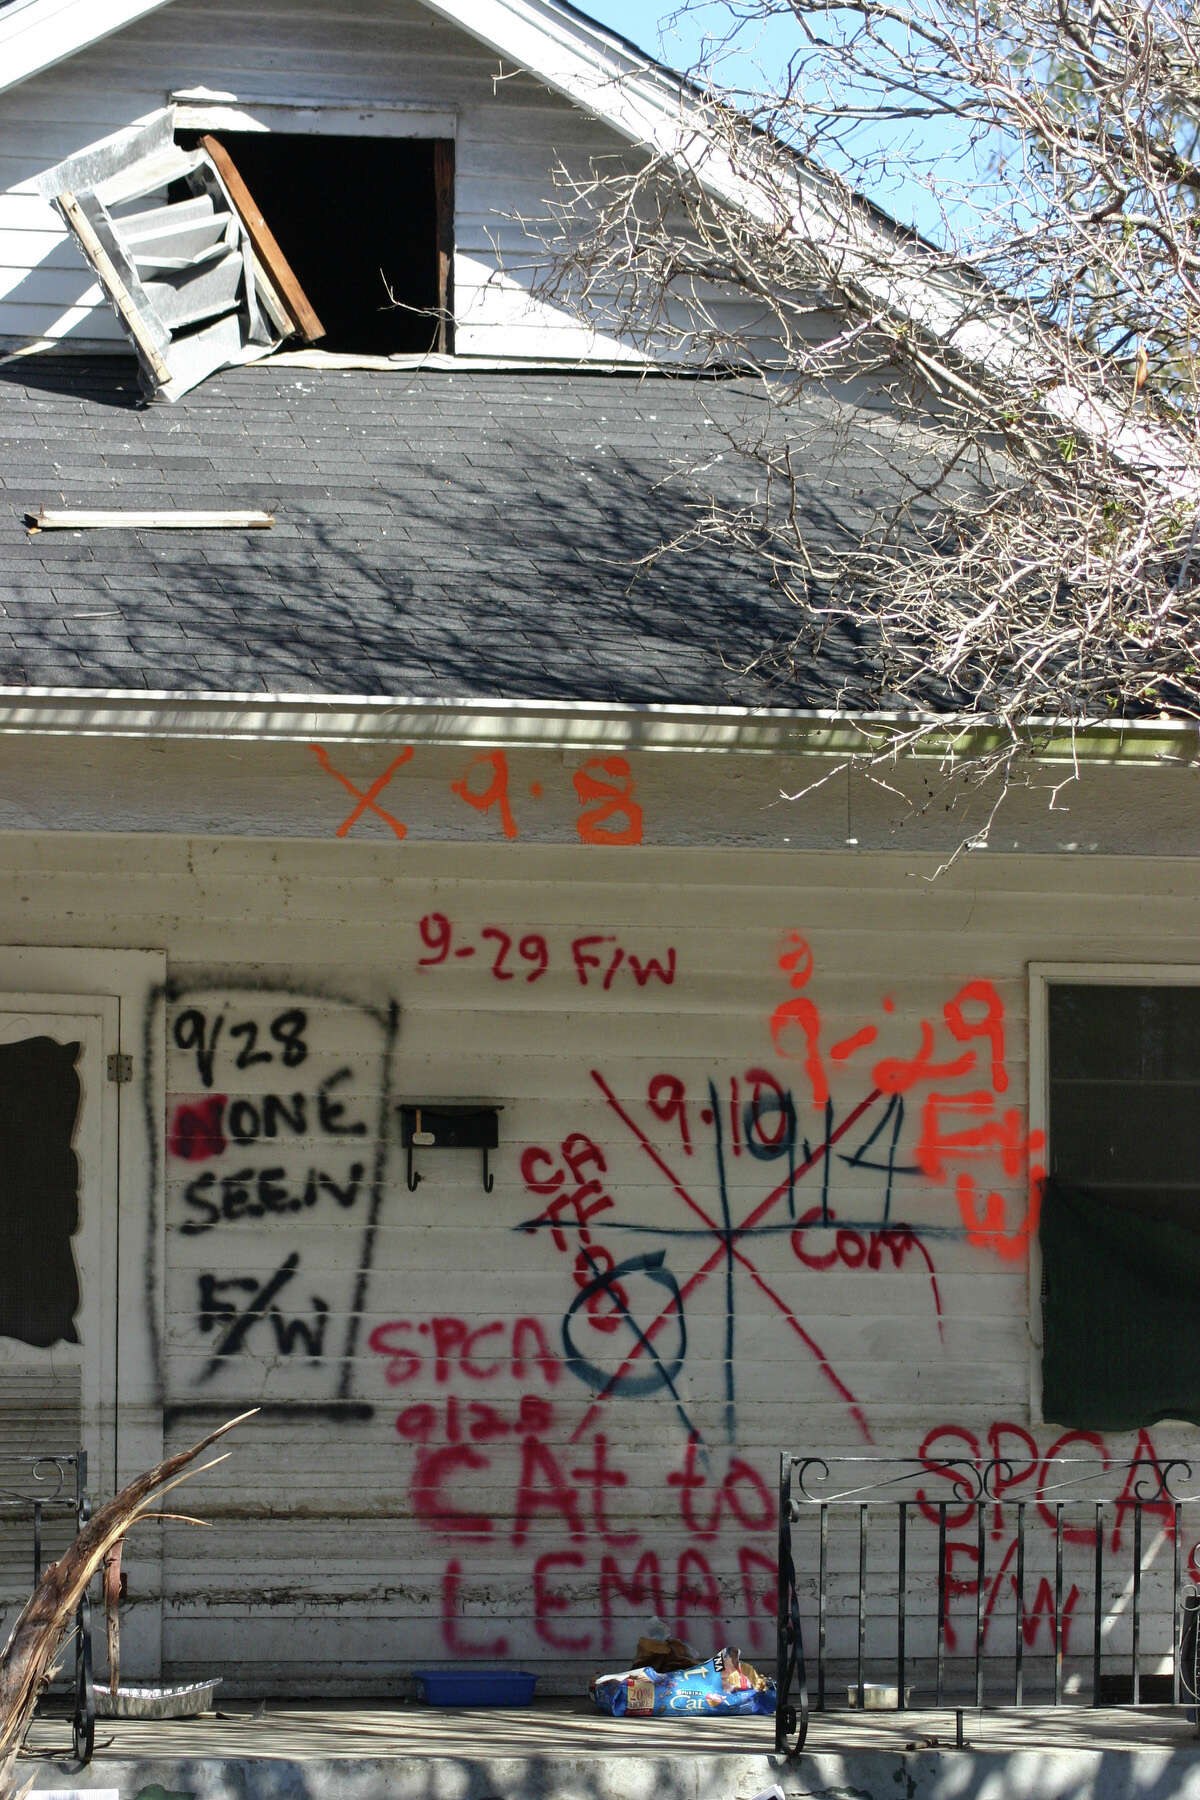 Photographs taken by Hurricane Katrina researcher Prof. Curtis Andrew show street art and other graffiti left in New Orleans' Lower Ninth Ward following the 2005 hurricane.